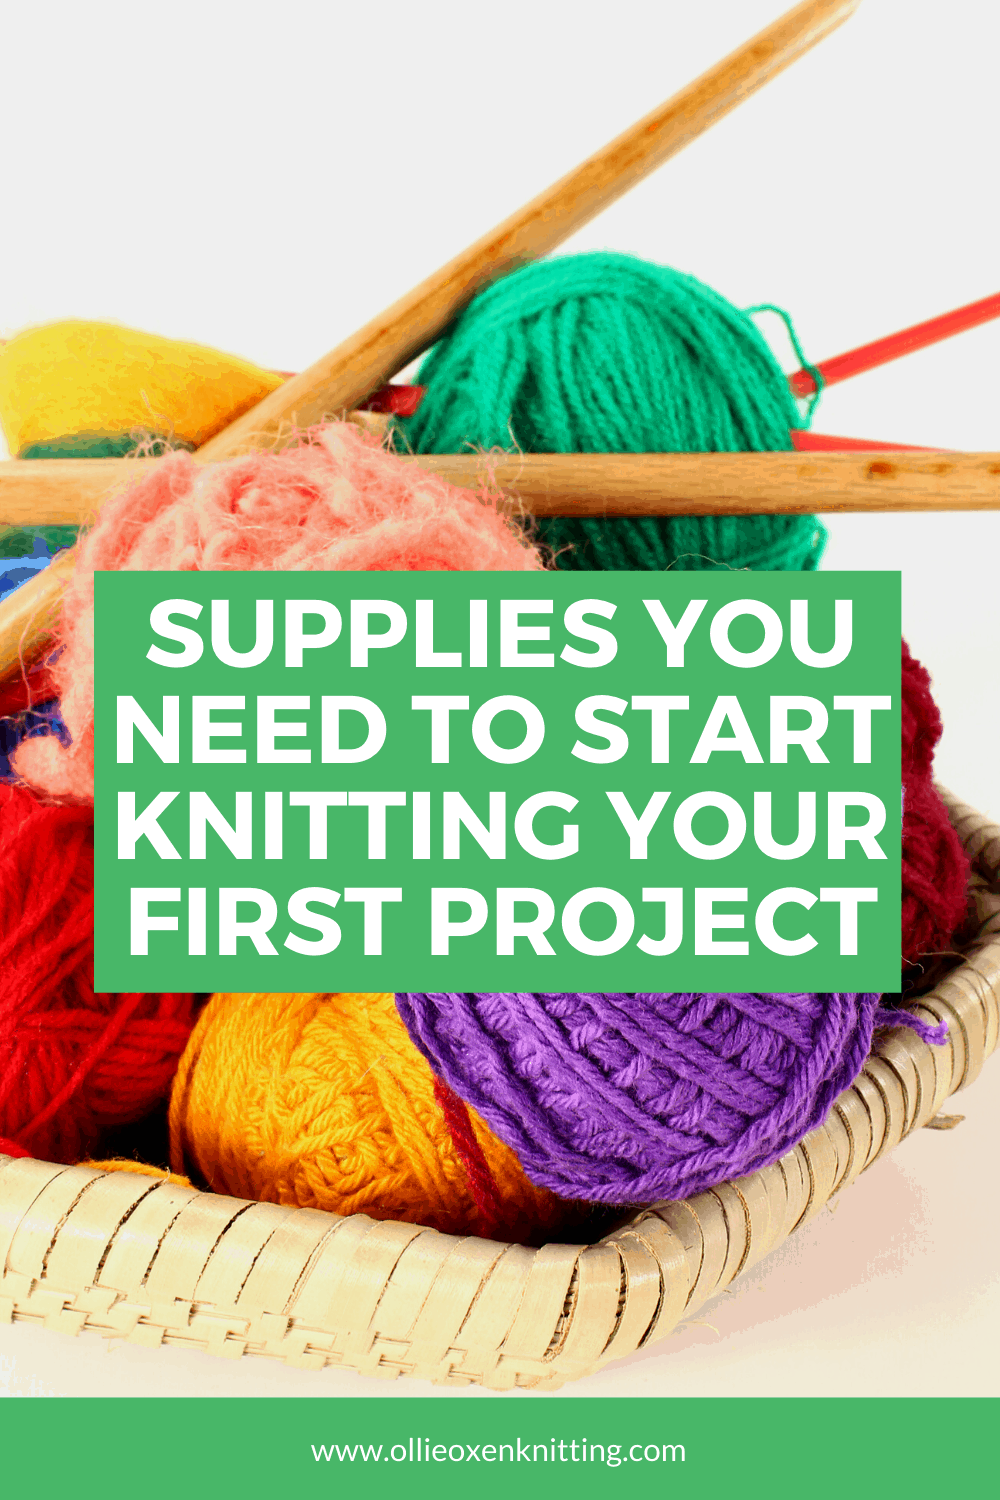 Supplies You Need To Start Knitting Your First Project | Ollie Oxen Knitting